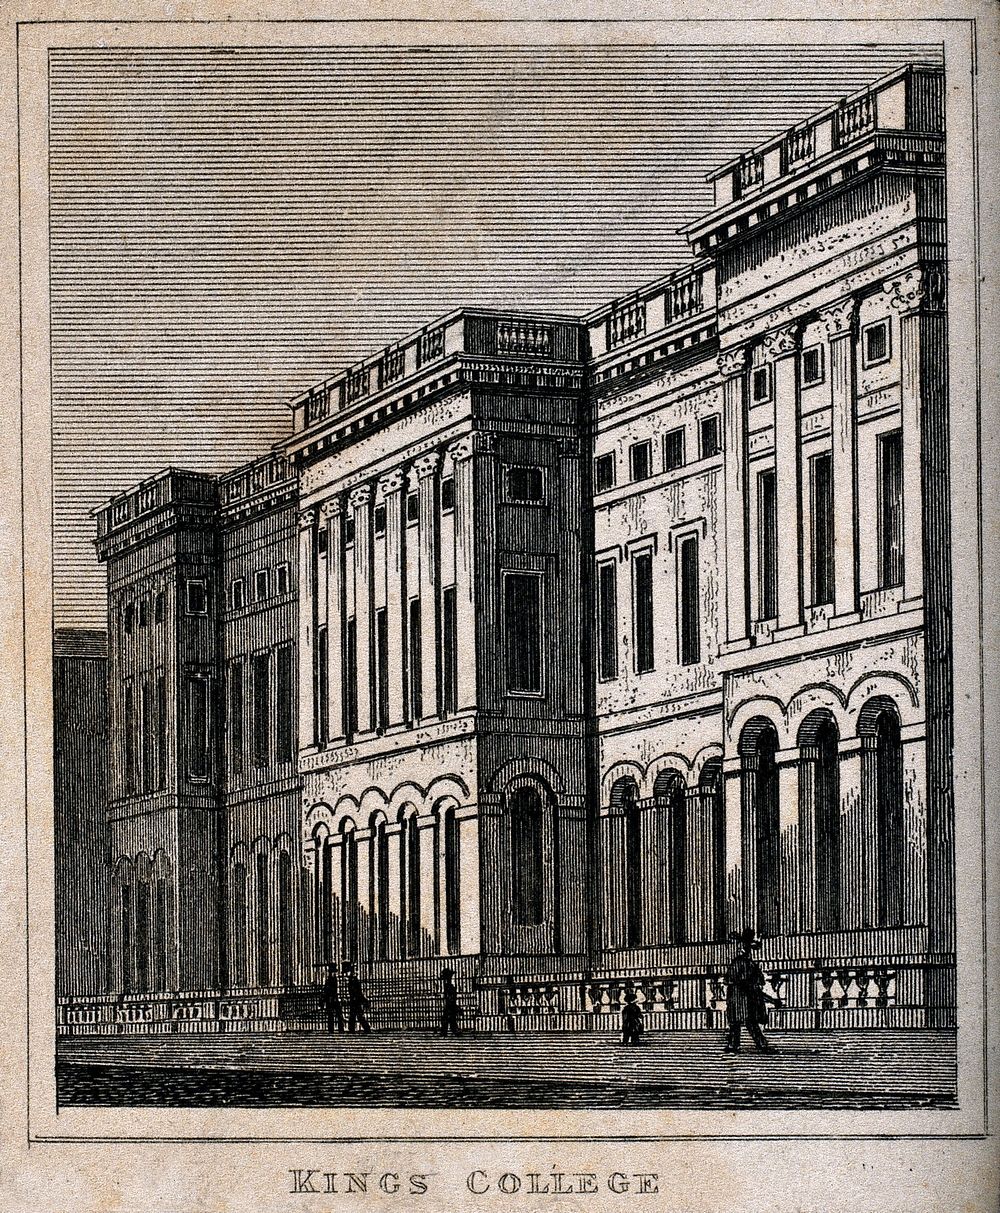 King's College, London. Engraving by J. Shury after T. H. Shepherd.